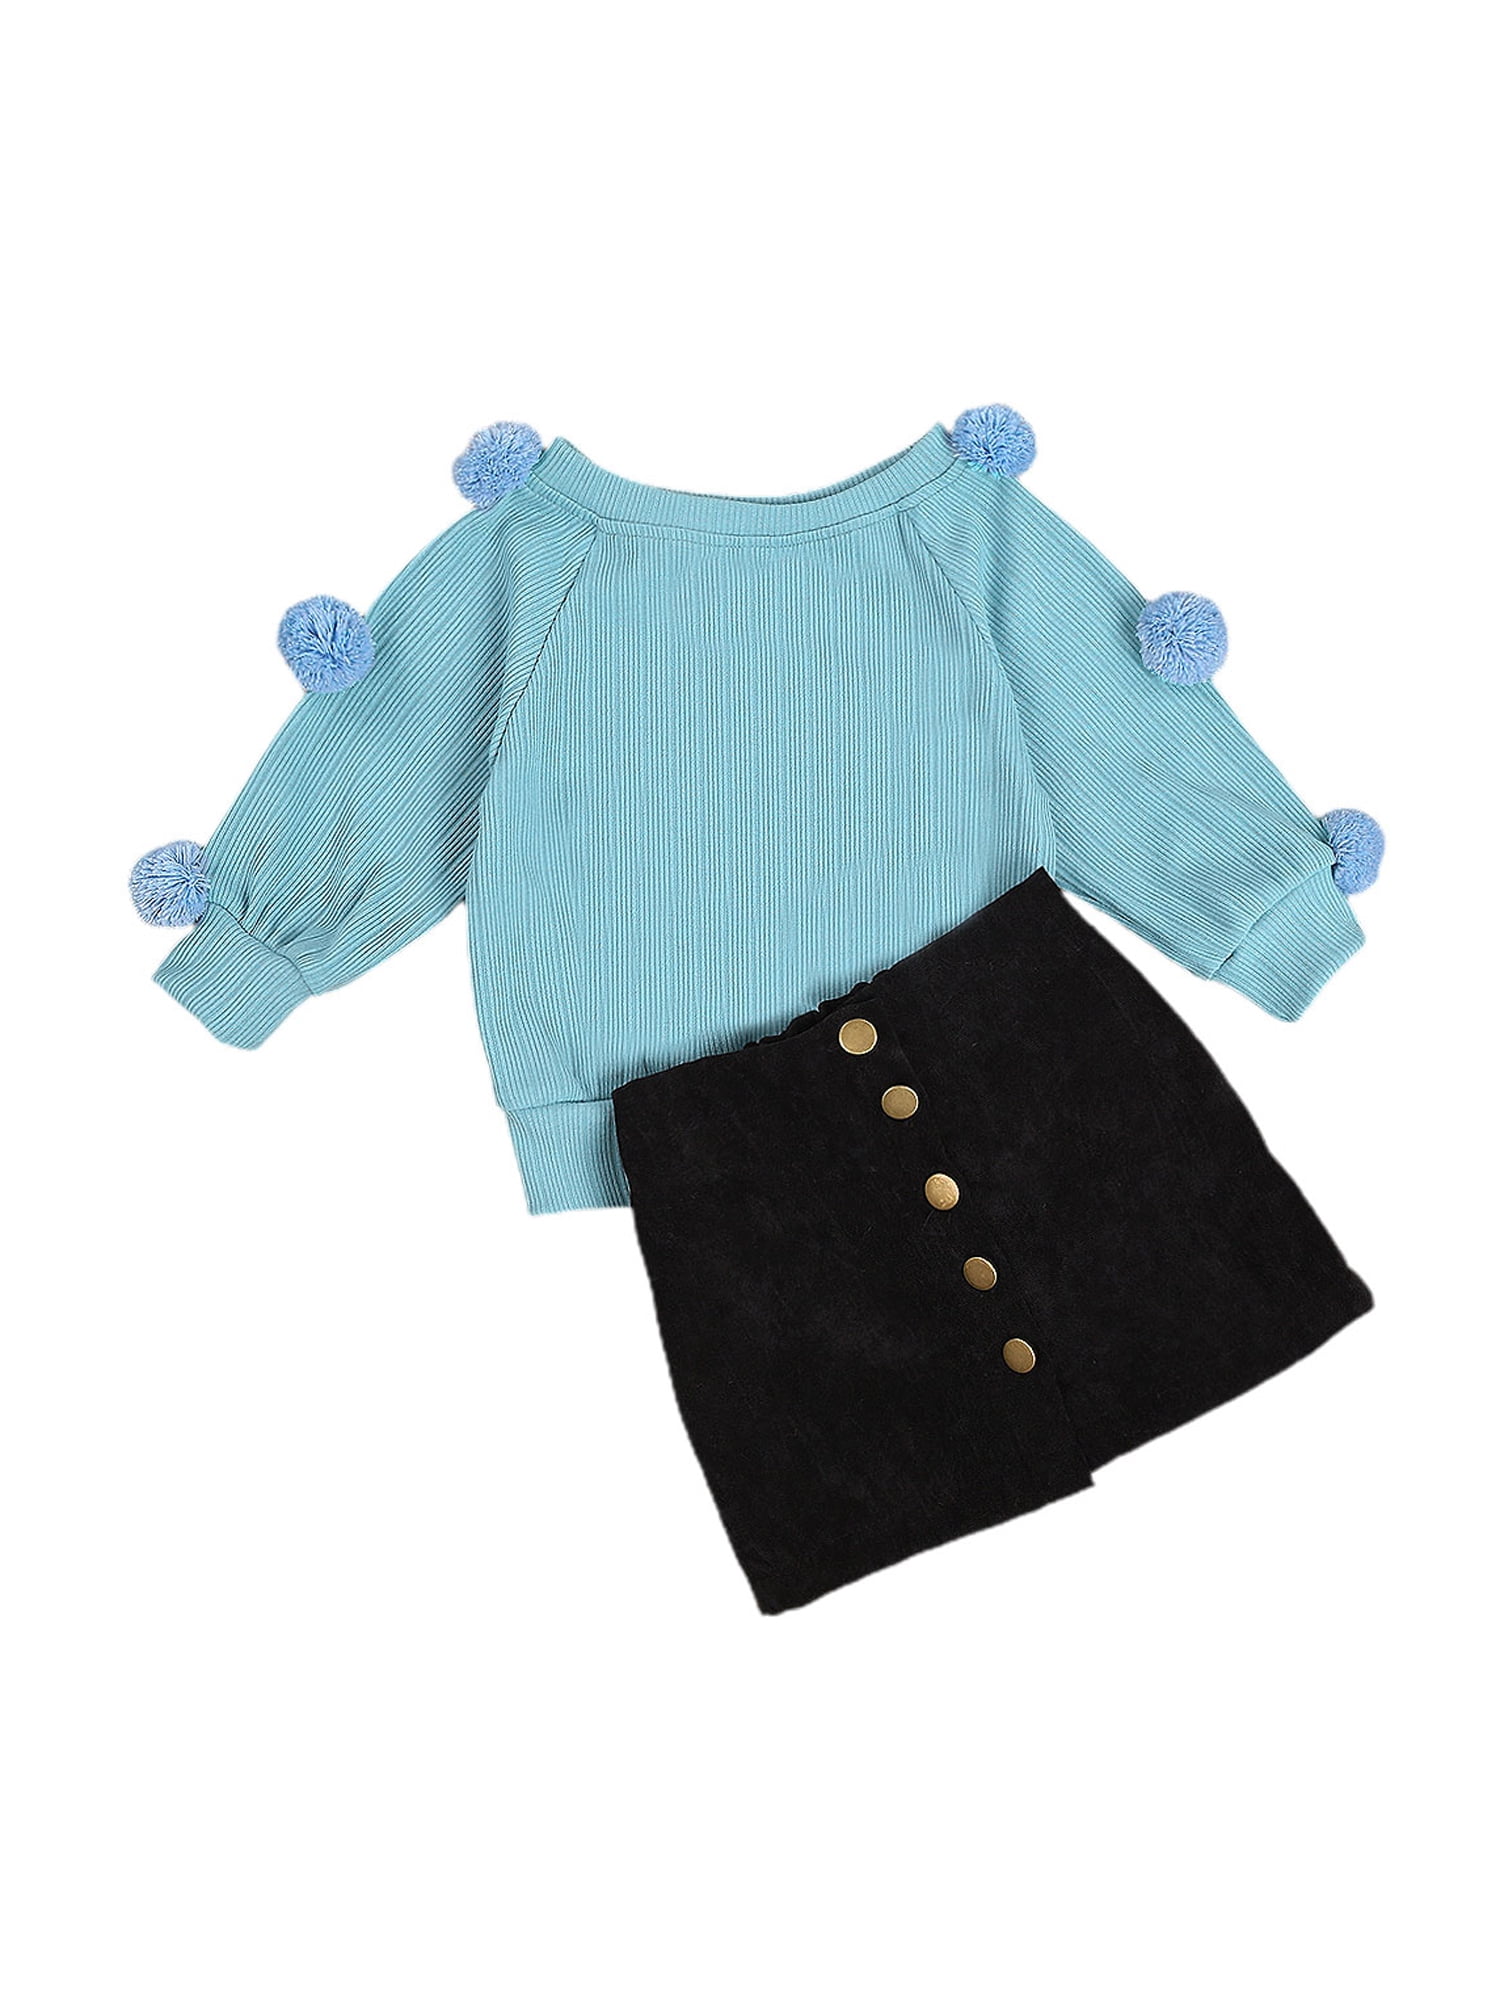 Skirt Dress Outfits Sets Details about   Baby Kids Girls Cute Printed Long Sleeve T-shirt Tops 